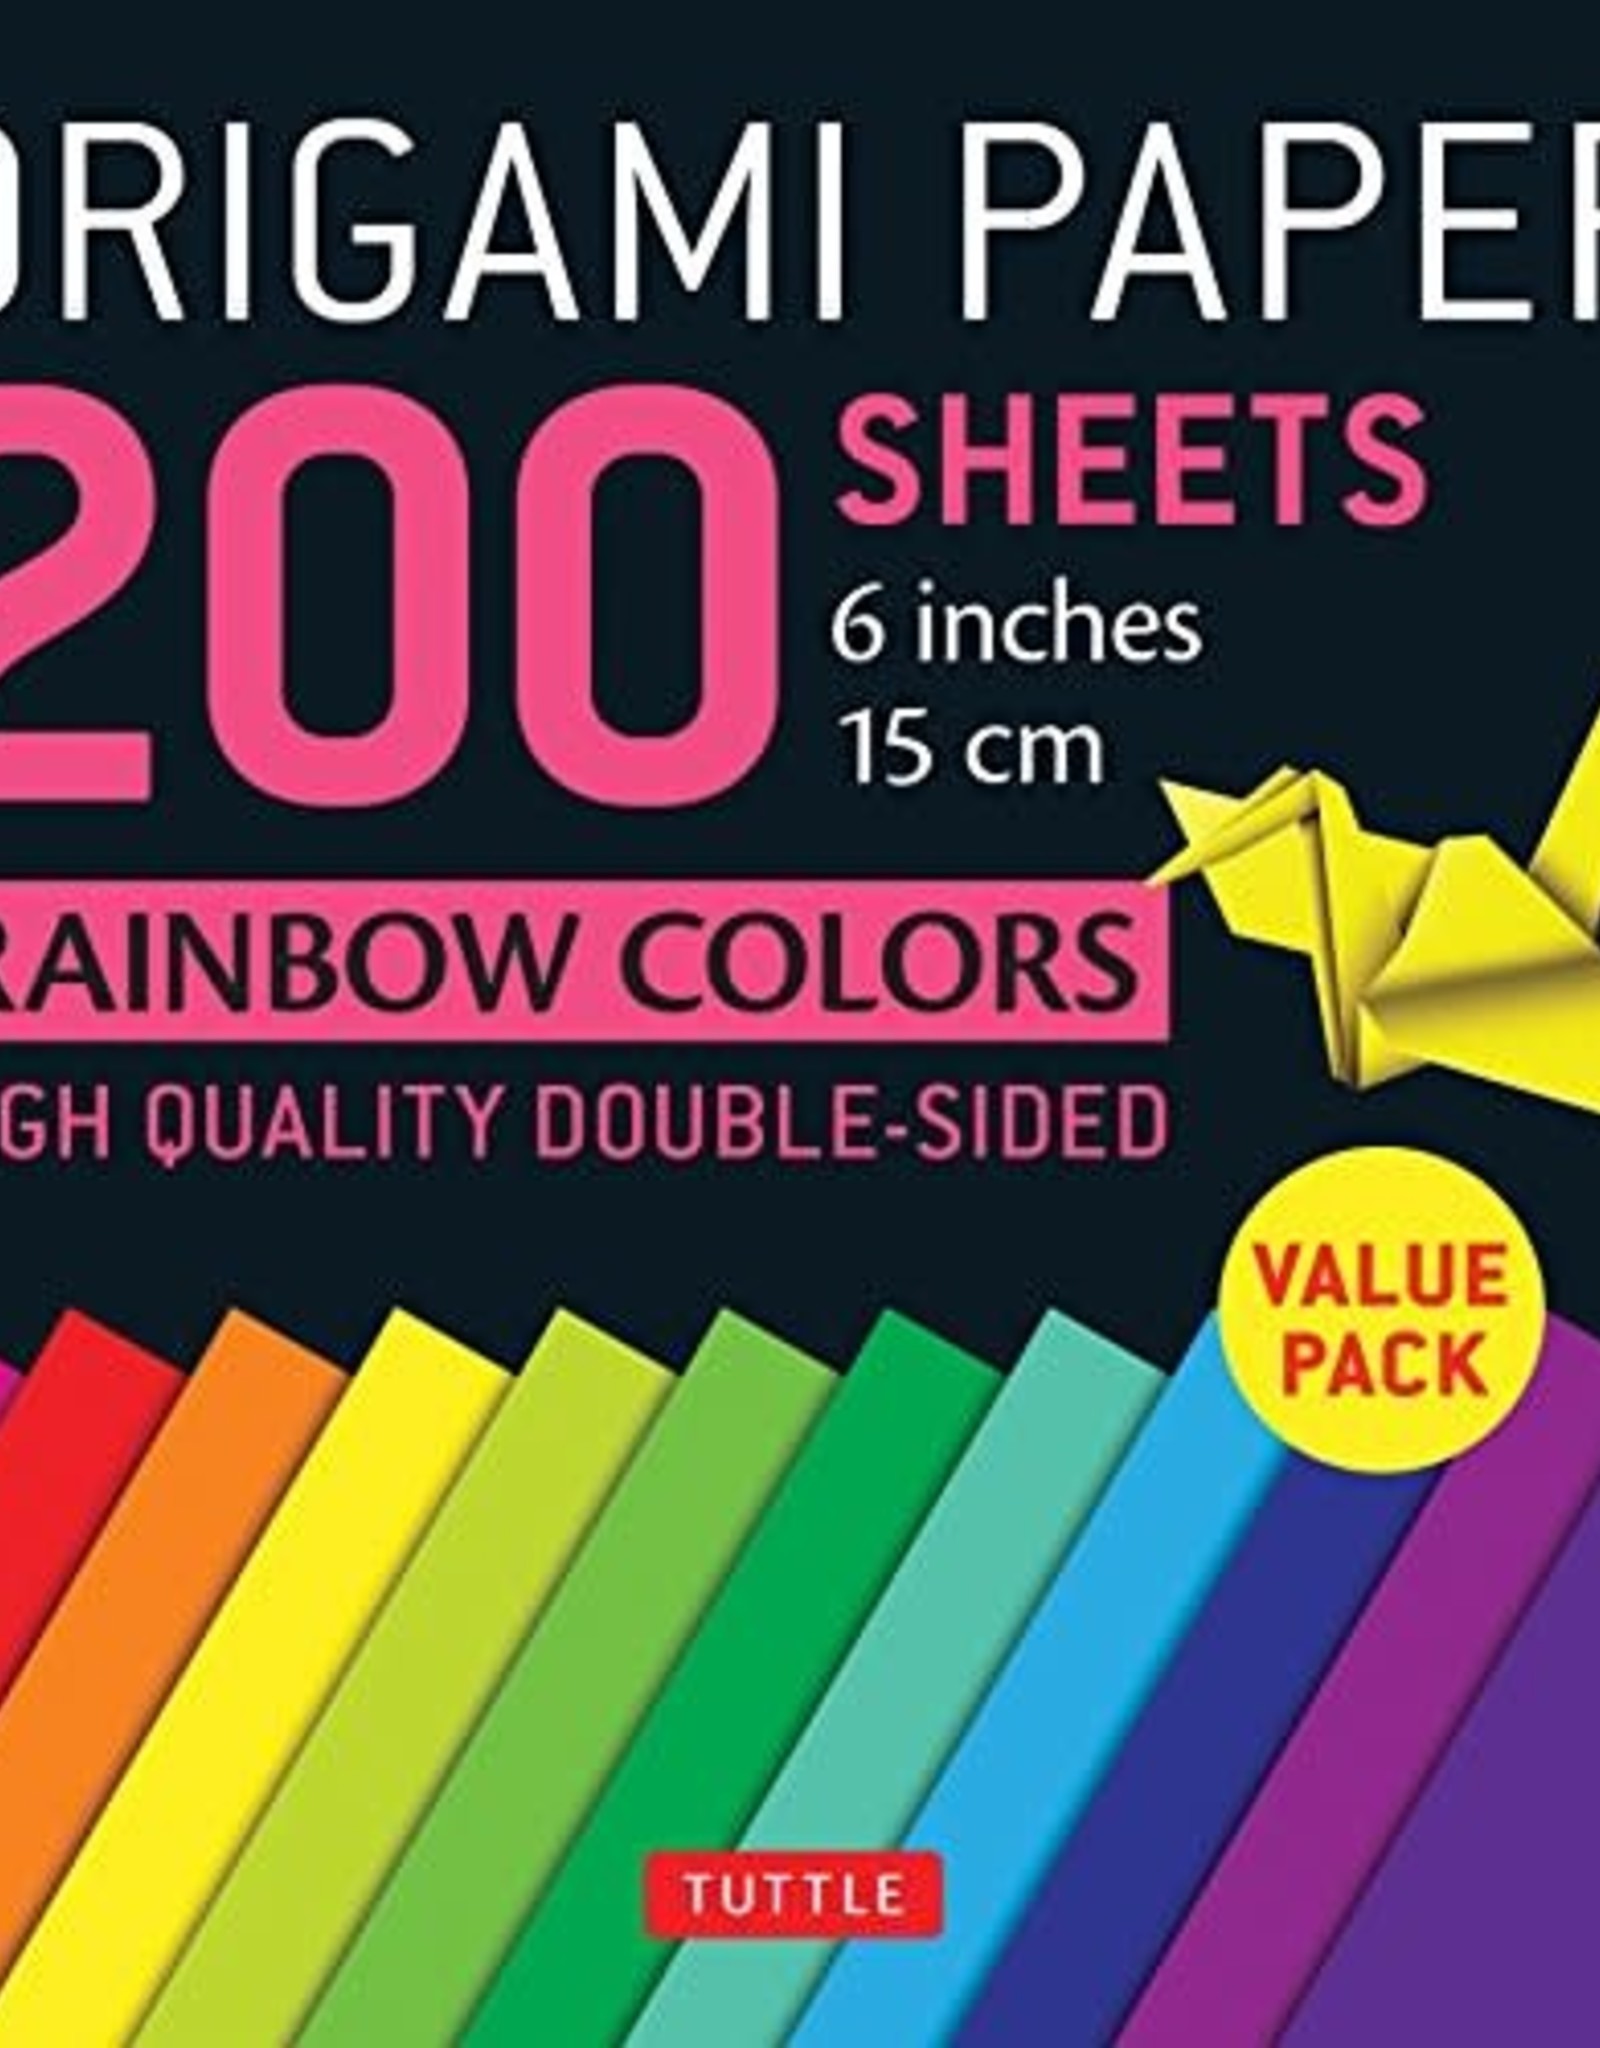 Origami Paper Rainbow Colors 200 Sheets